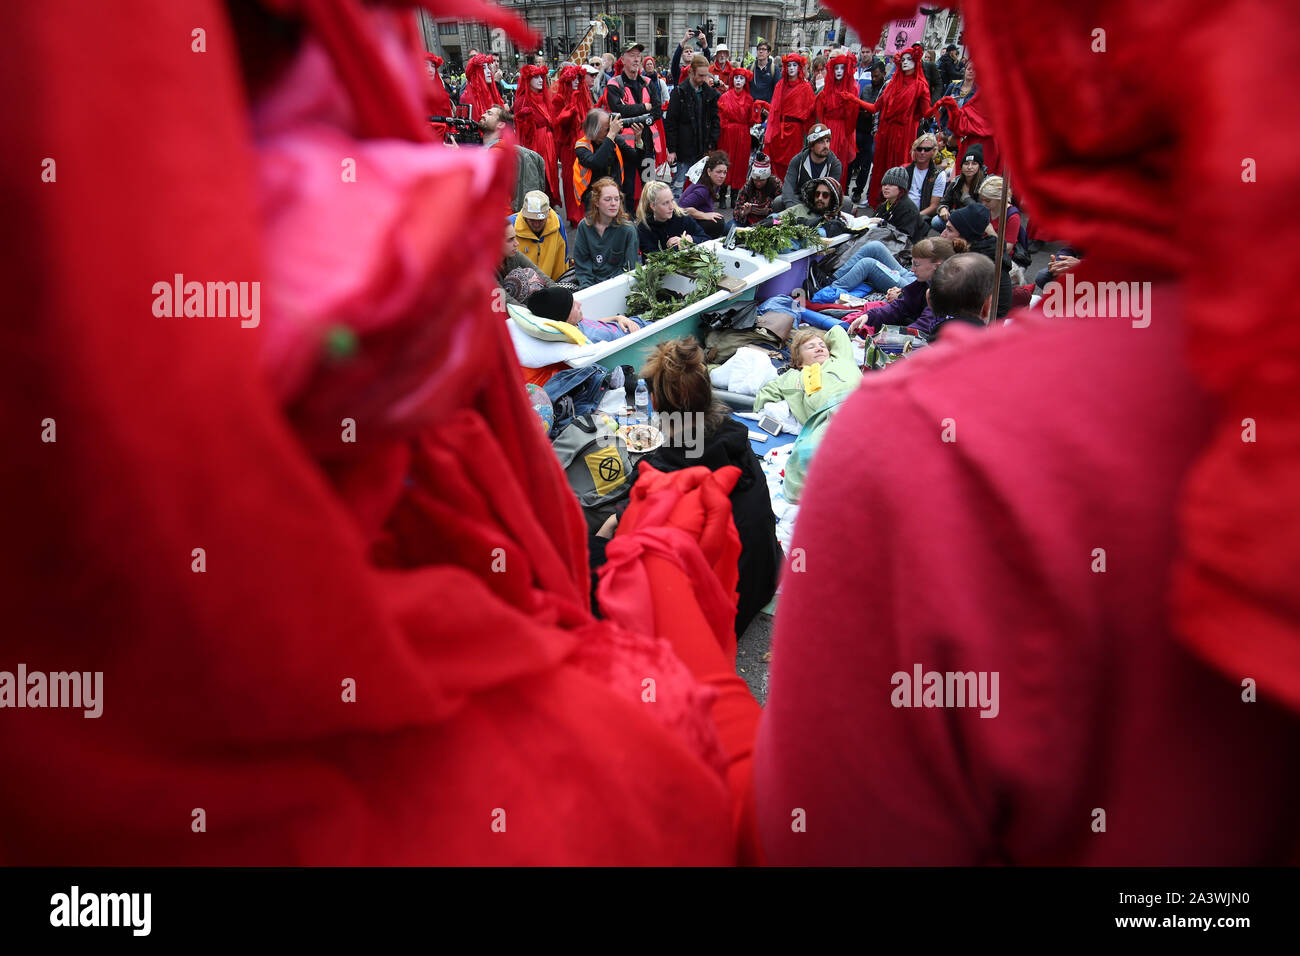 The red rebels encircle protesters in bathtubs in Trafalgar Square during the fourth day of an Extinction Rebellion (XR) protest in Westminster, London. Stock Photo